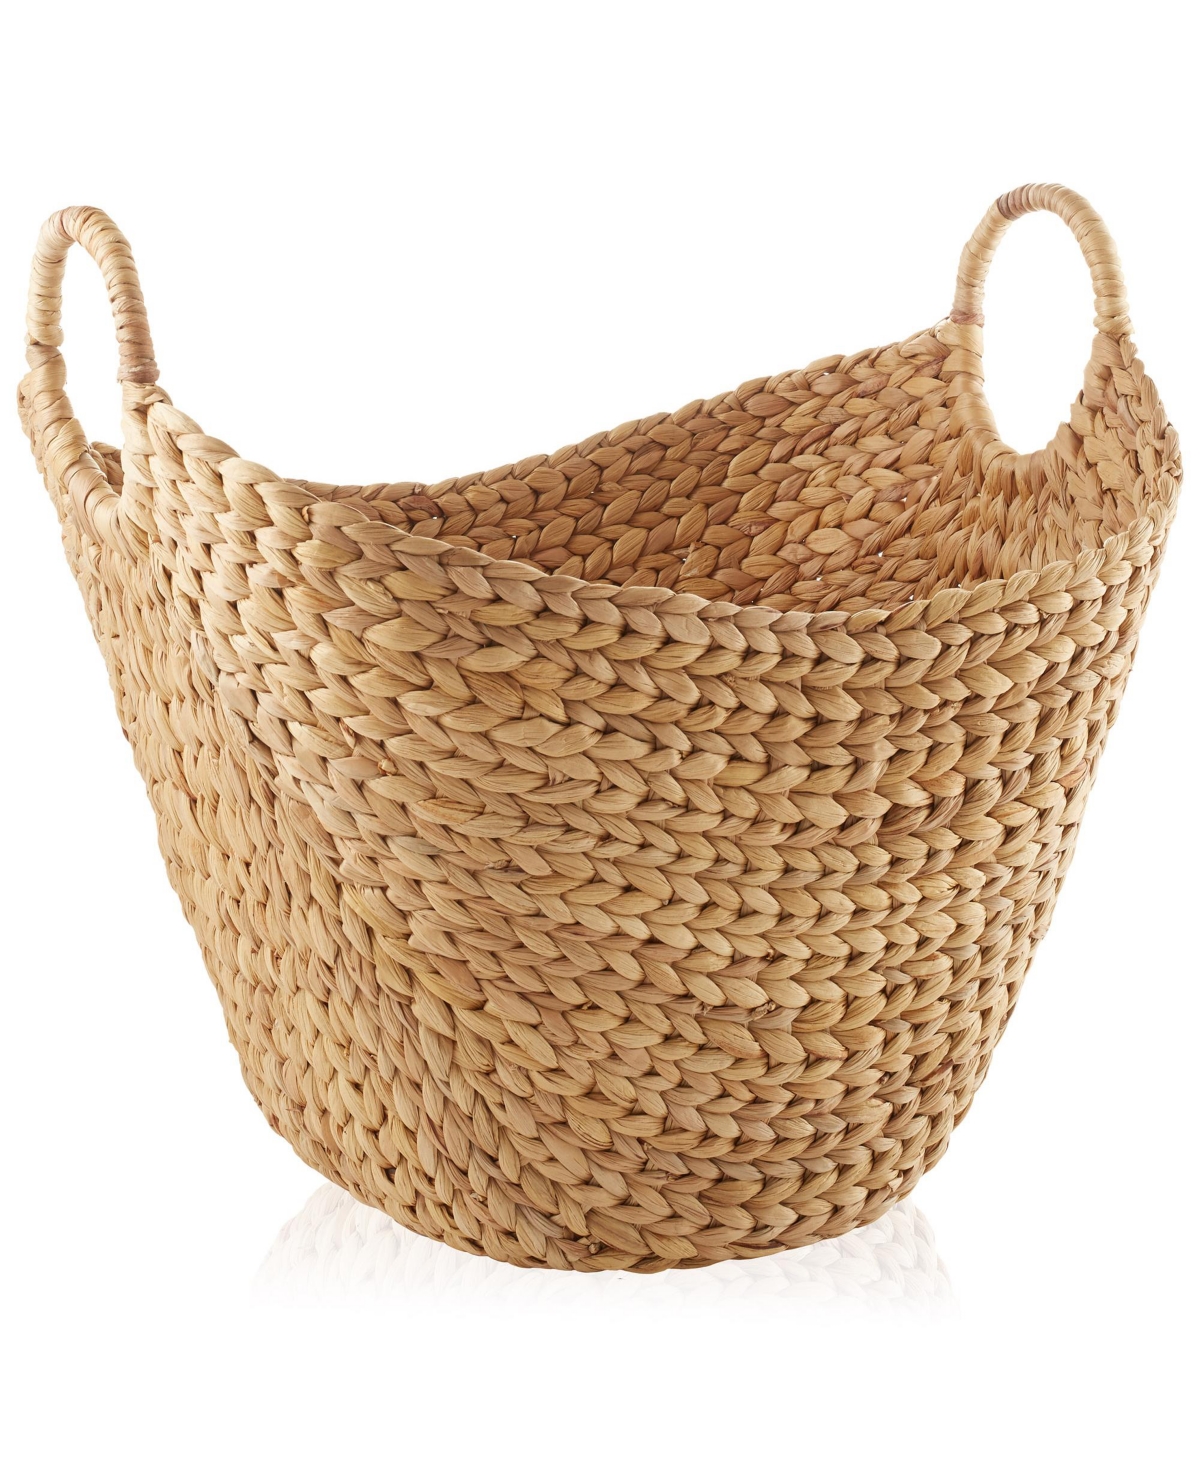 Large Laundry Boat Basket with Handles, Woven Water Hyacinth Storage Tote for Blankets, Bathroom, Bedroom, Living Room - Natural